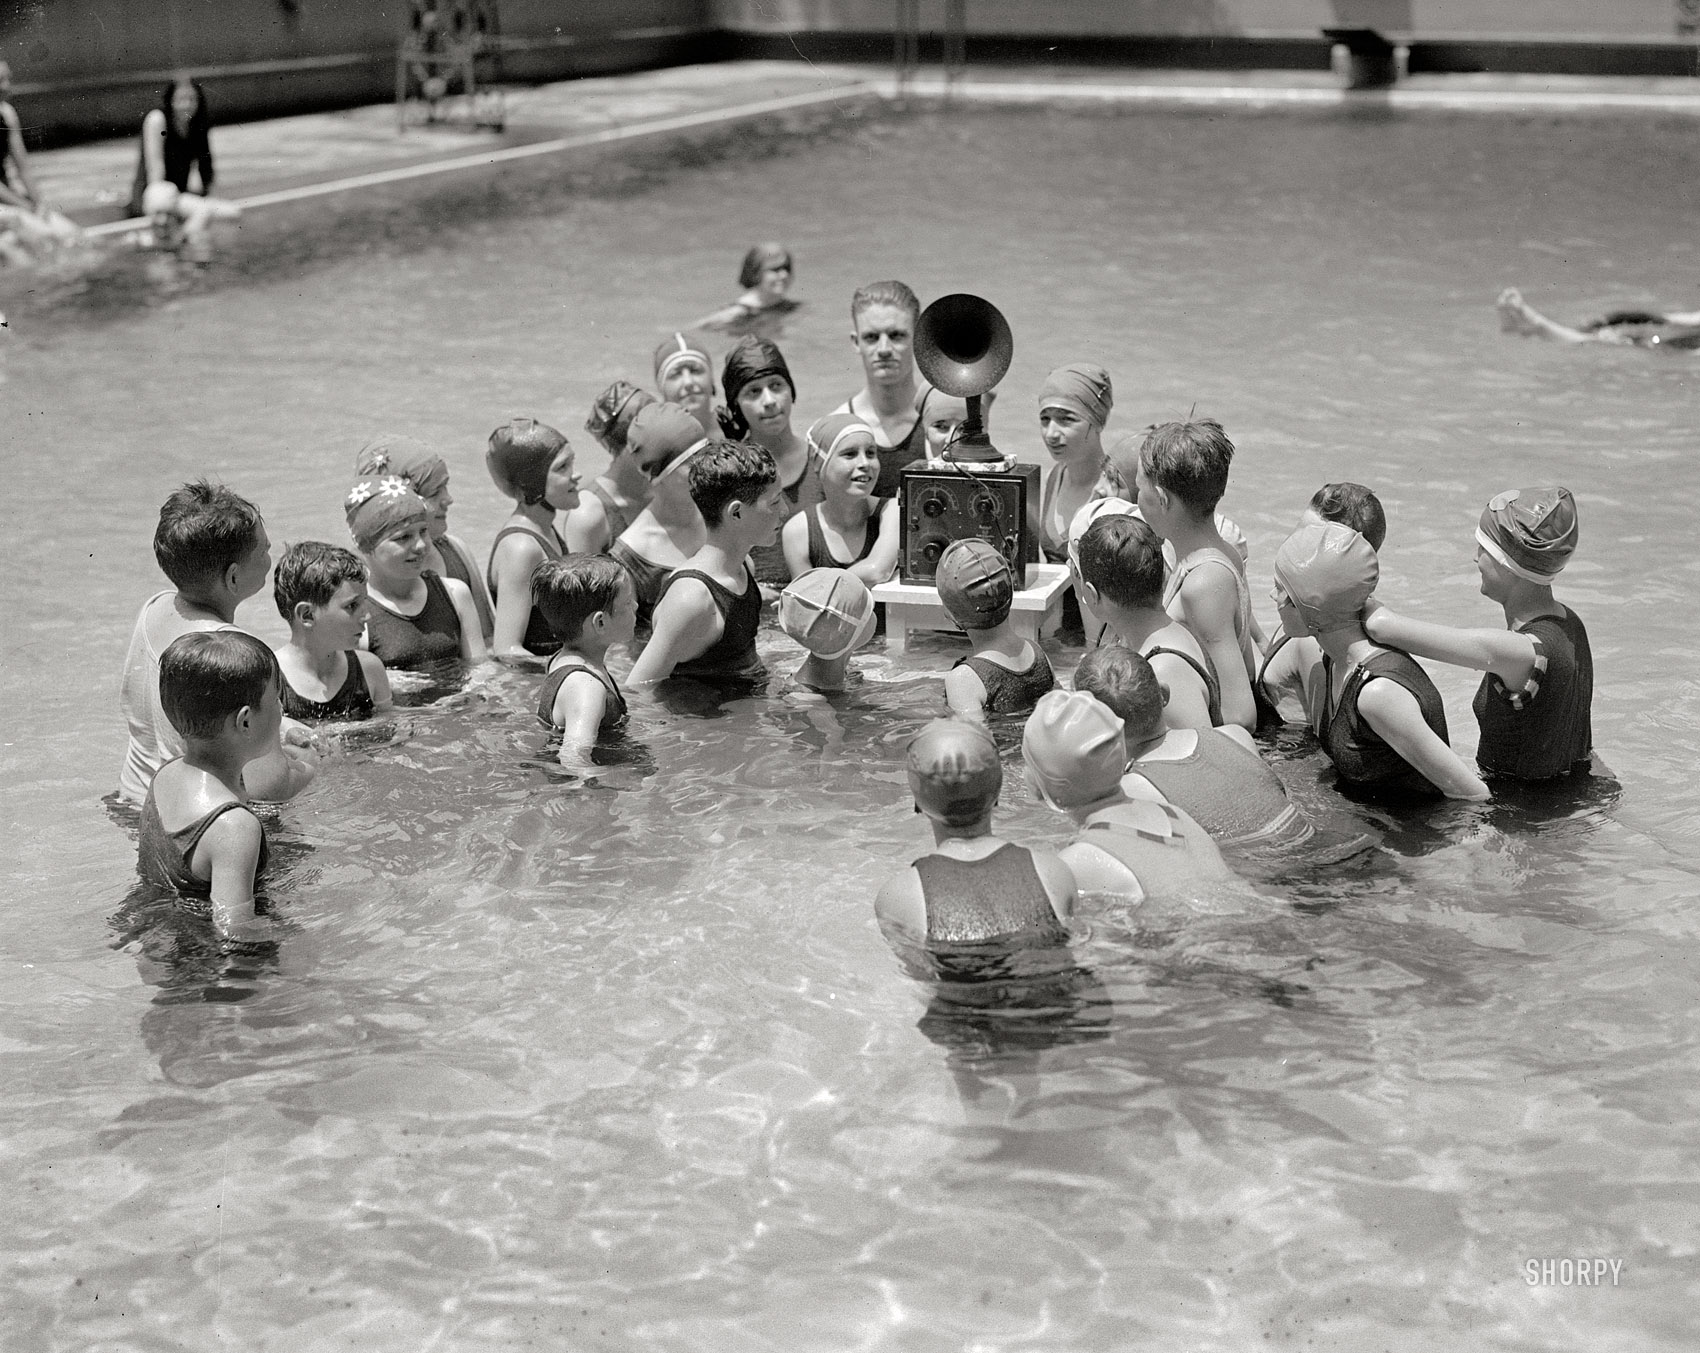 July 10, 1924. Washington, D.C. "Radio at Wardman Park Hotel pool" -- 85 years ago today. National Photo Company Collection glass negative. View full size.